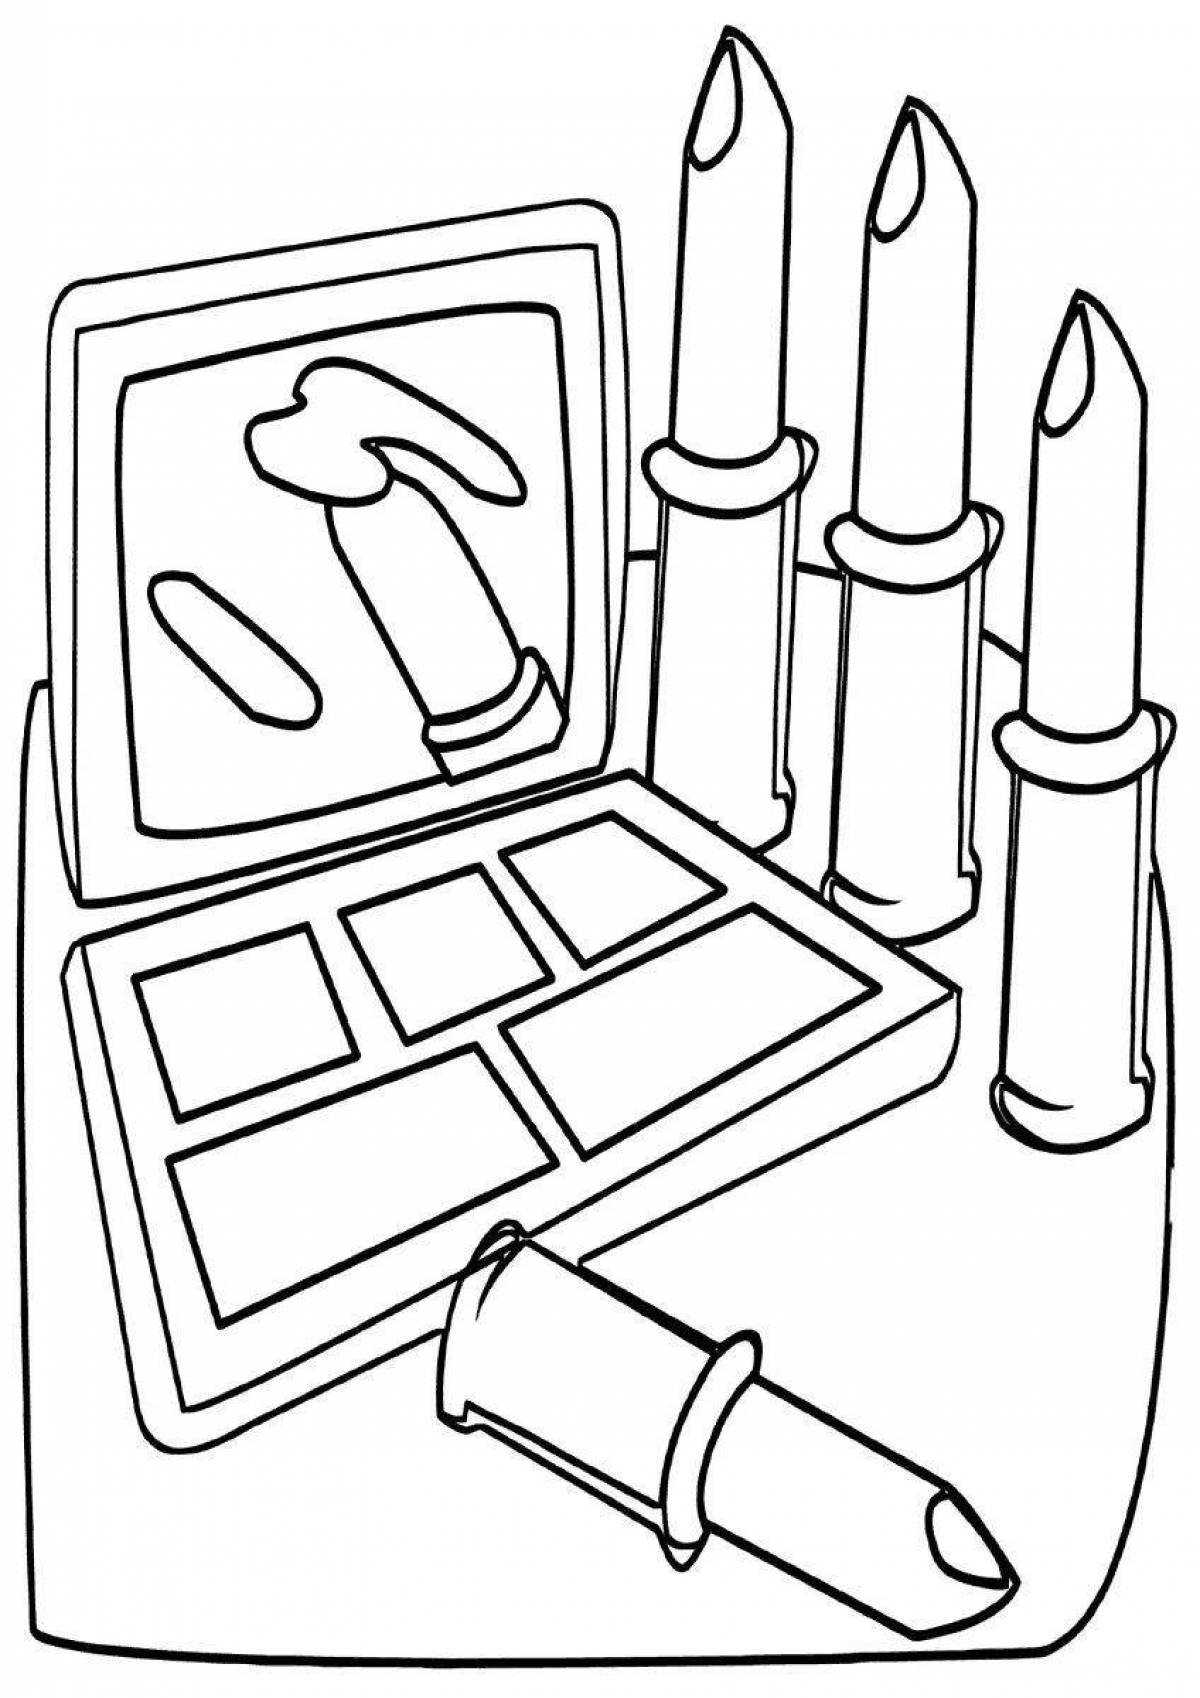 Serene shadows for coloring page